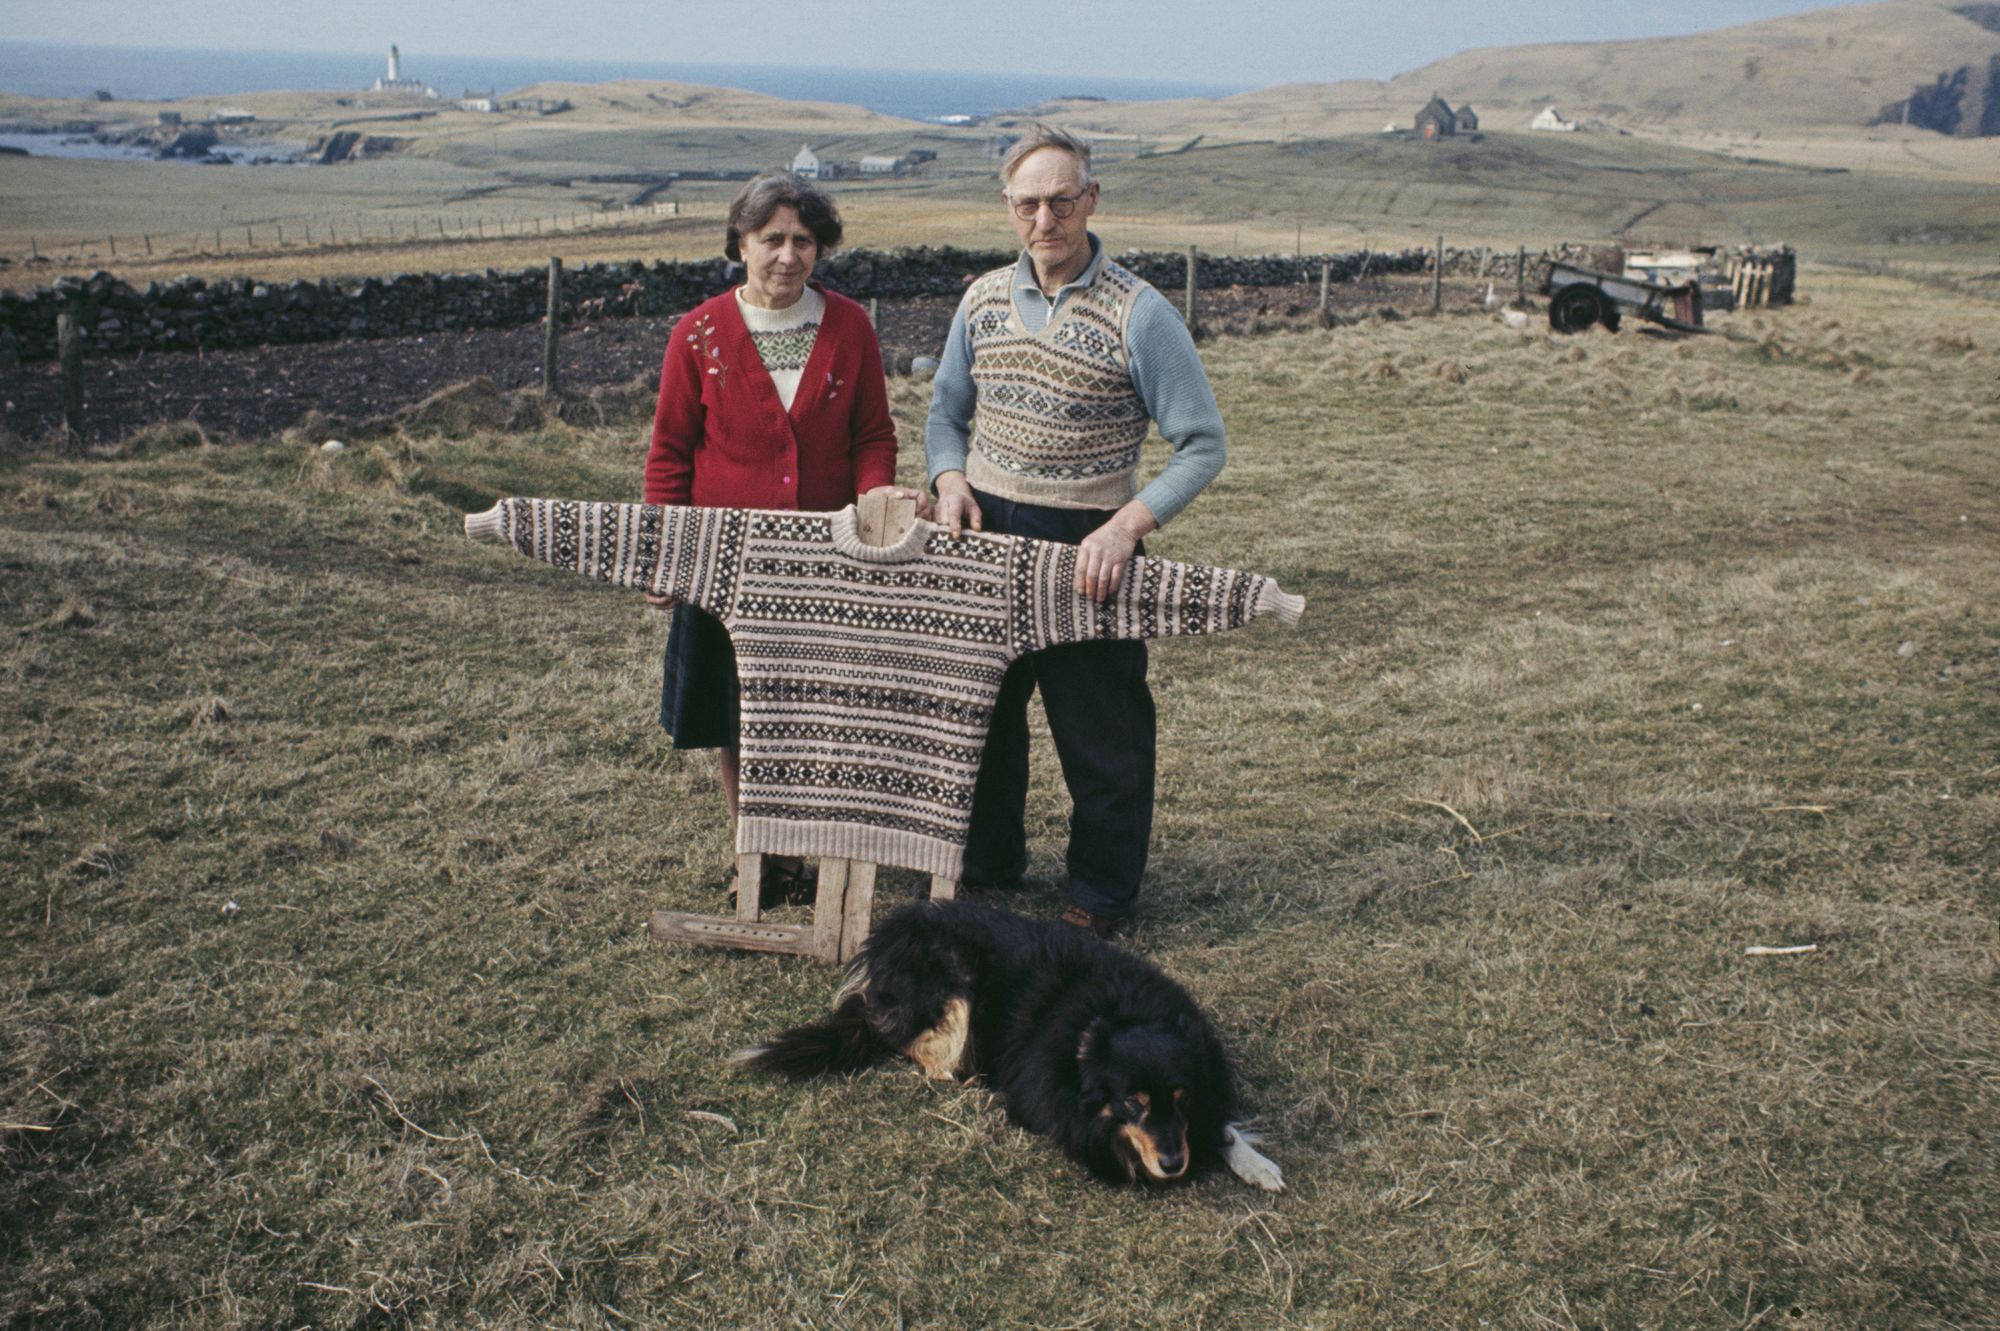 A couple with a traditional Fair Isle pattern sweater on a board, Fair Isle, Shetland Islands, Scotland, June 1970. (Photo by Chris Morphet/Redferns)